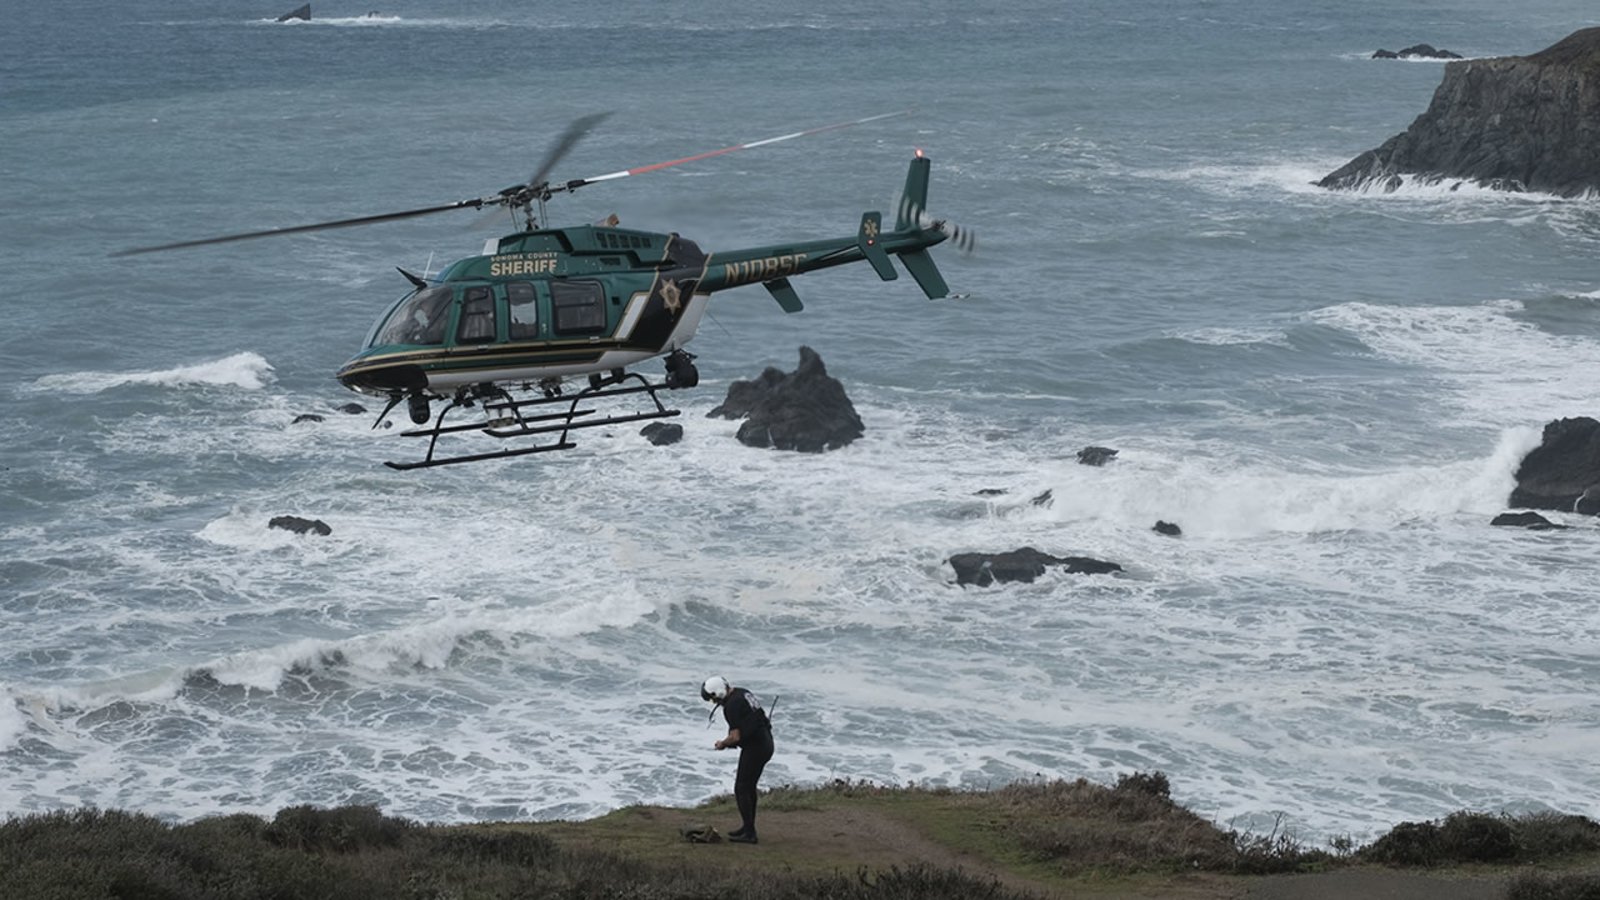 Search resumes for 2 children swept to sea at Sonoma County